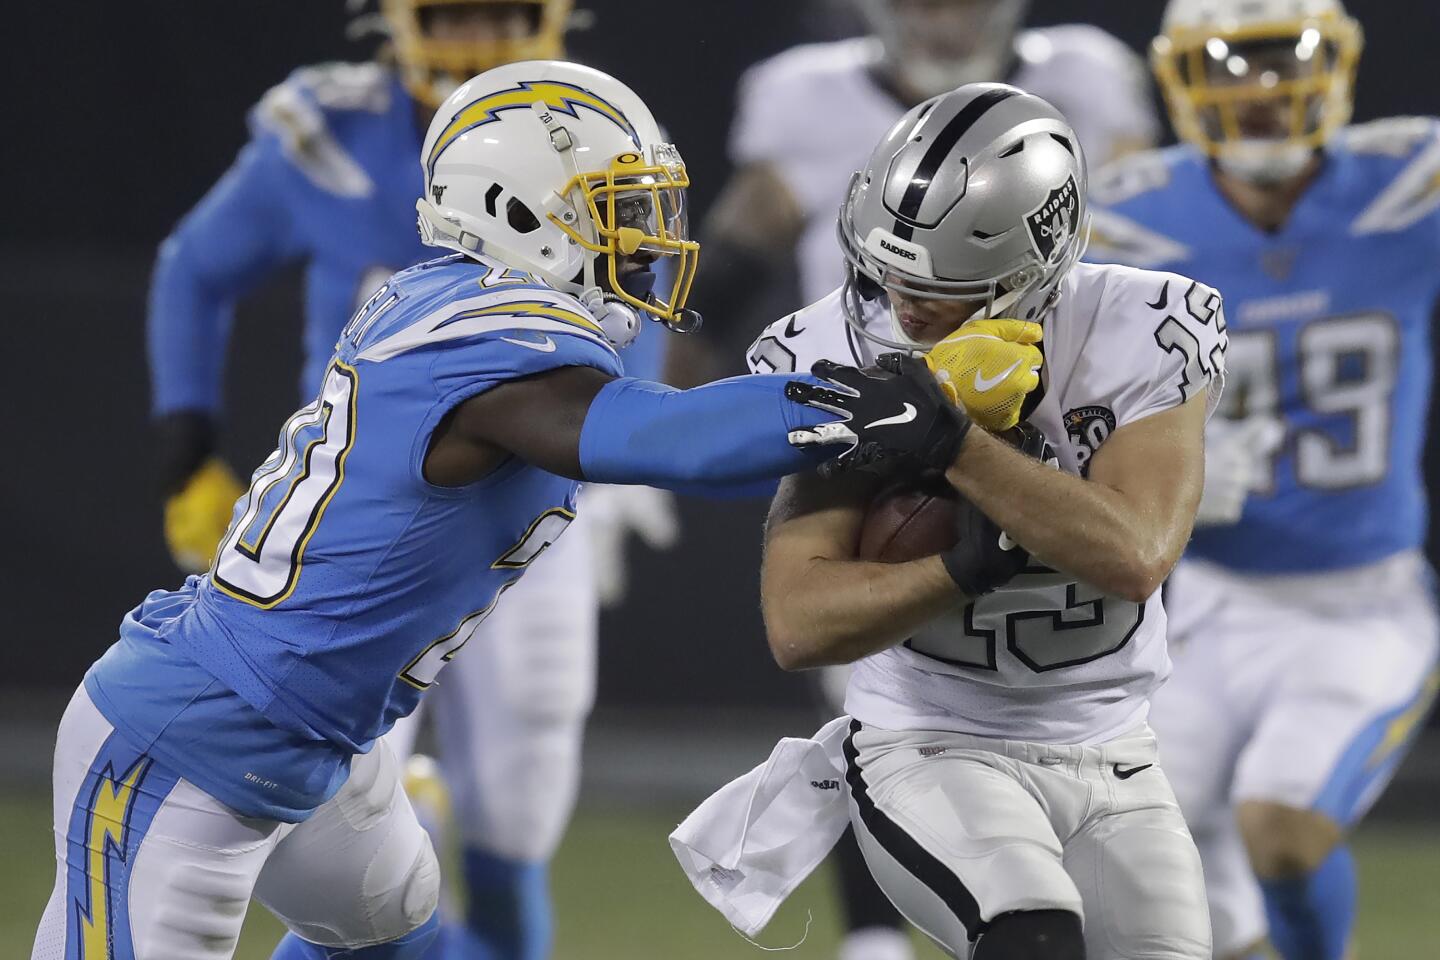 Chargers defensive back Desmond King II (20) grabs Raiders receiver Hunter Renfrow's facemask during the second half of a game Nov. 7 at RingCentral Coliseum.